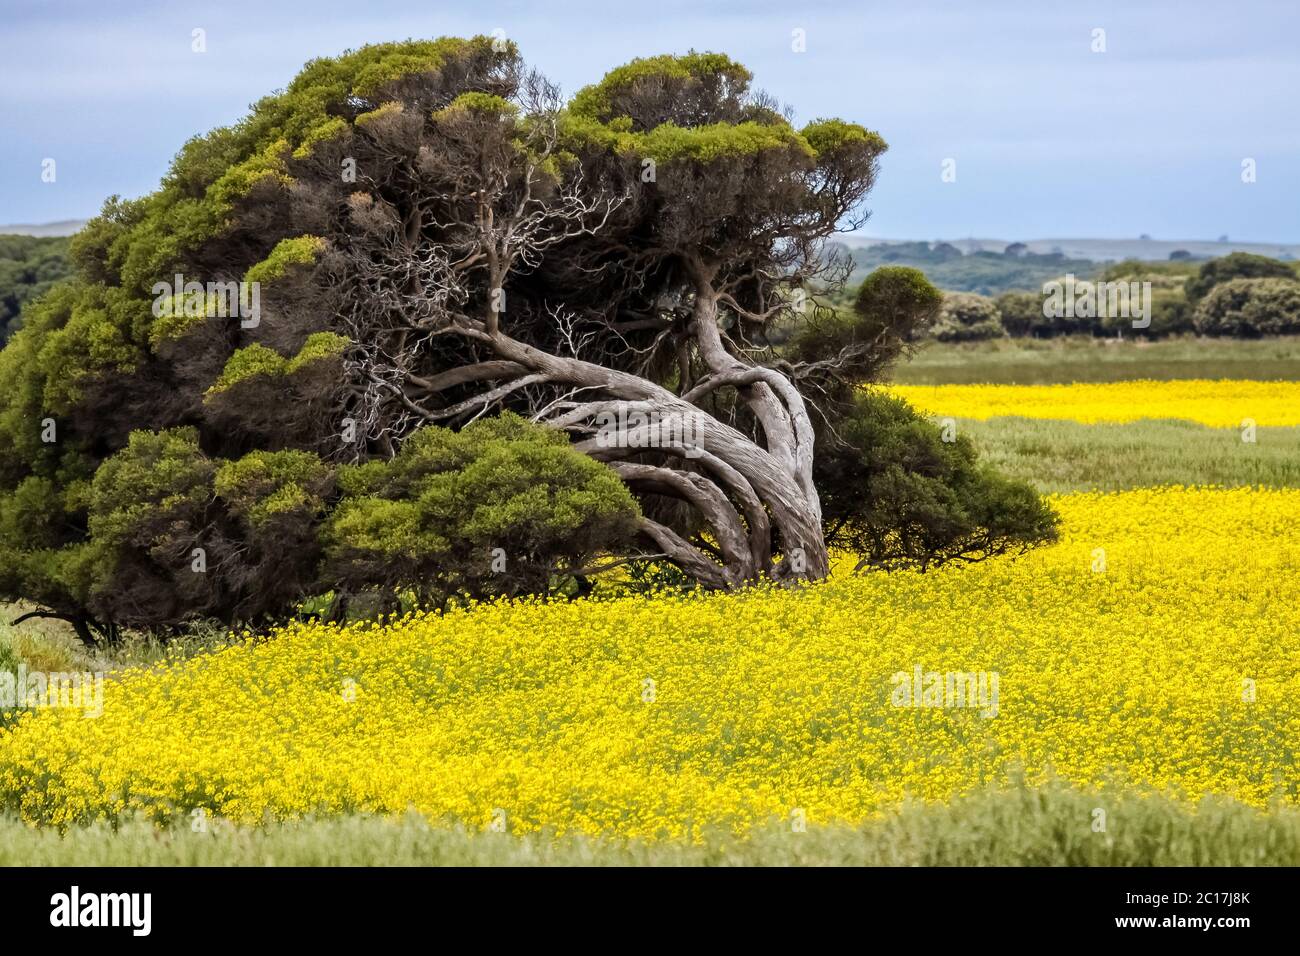 Leaning tree in a field of yellow rape, South Australia Stock Photo